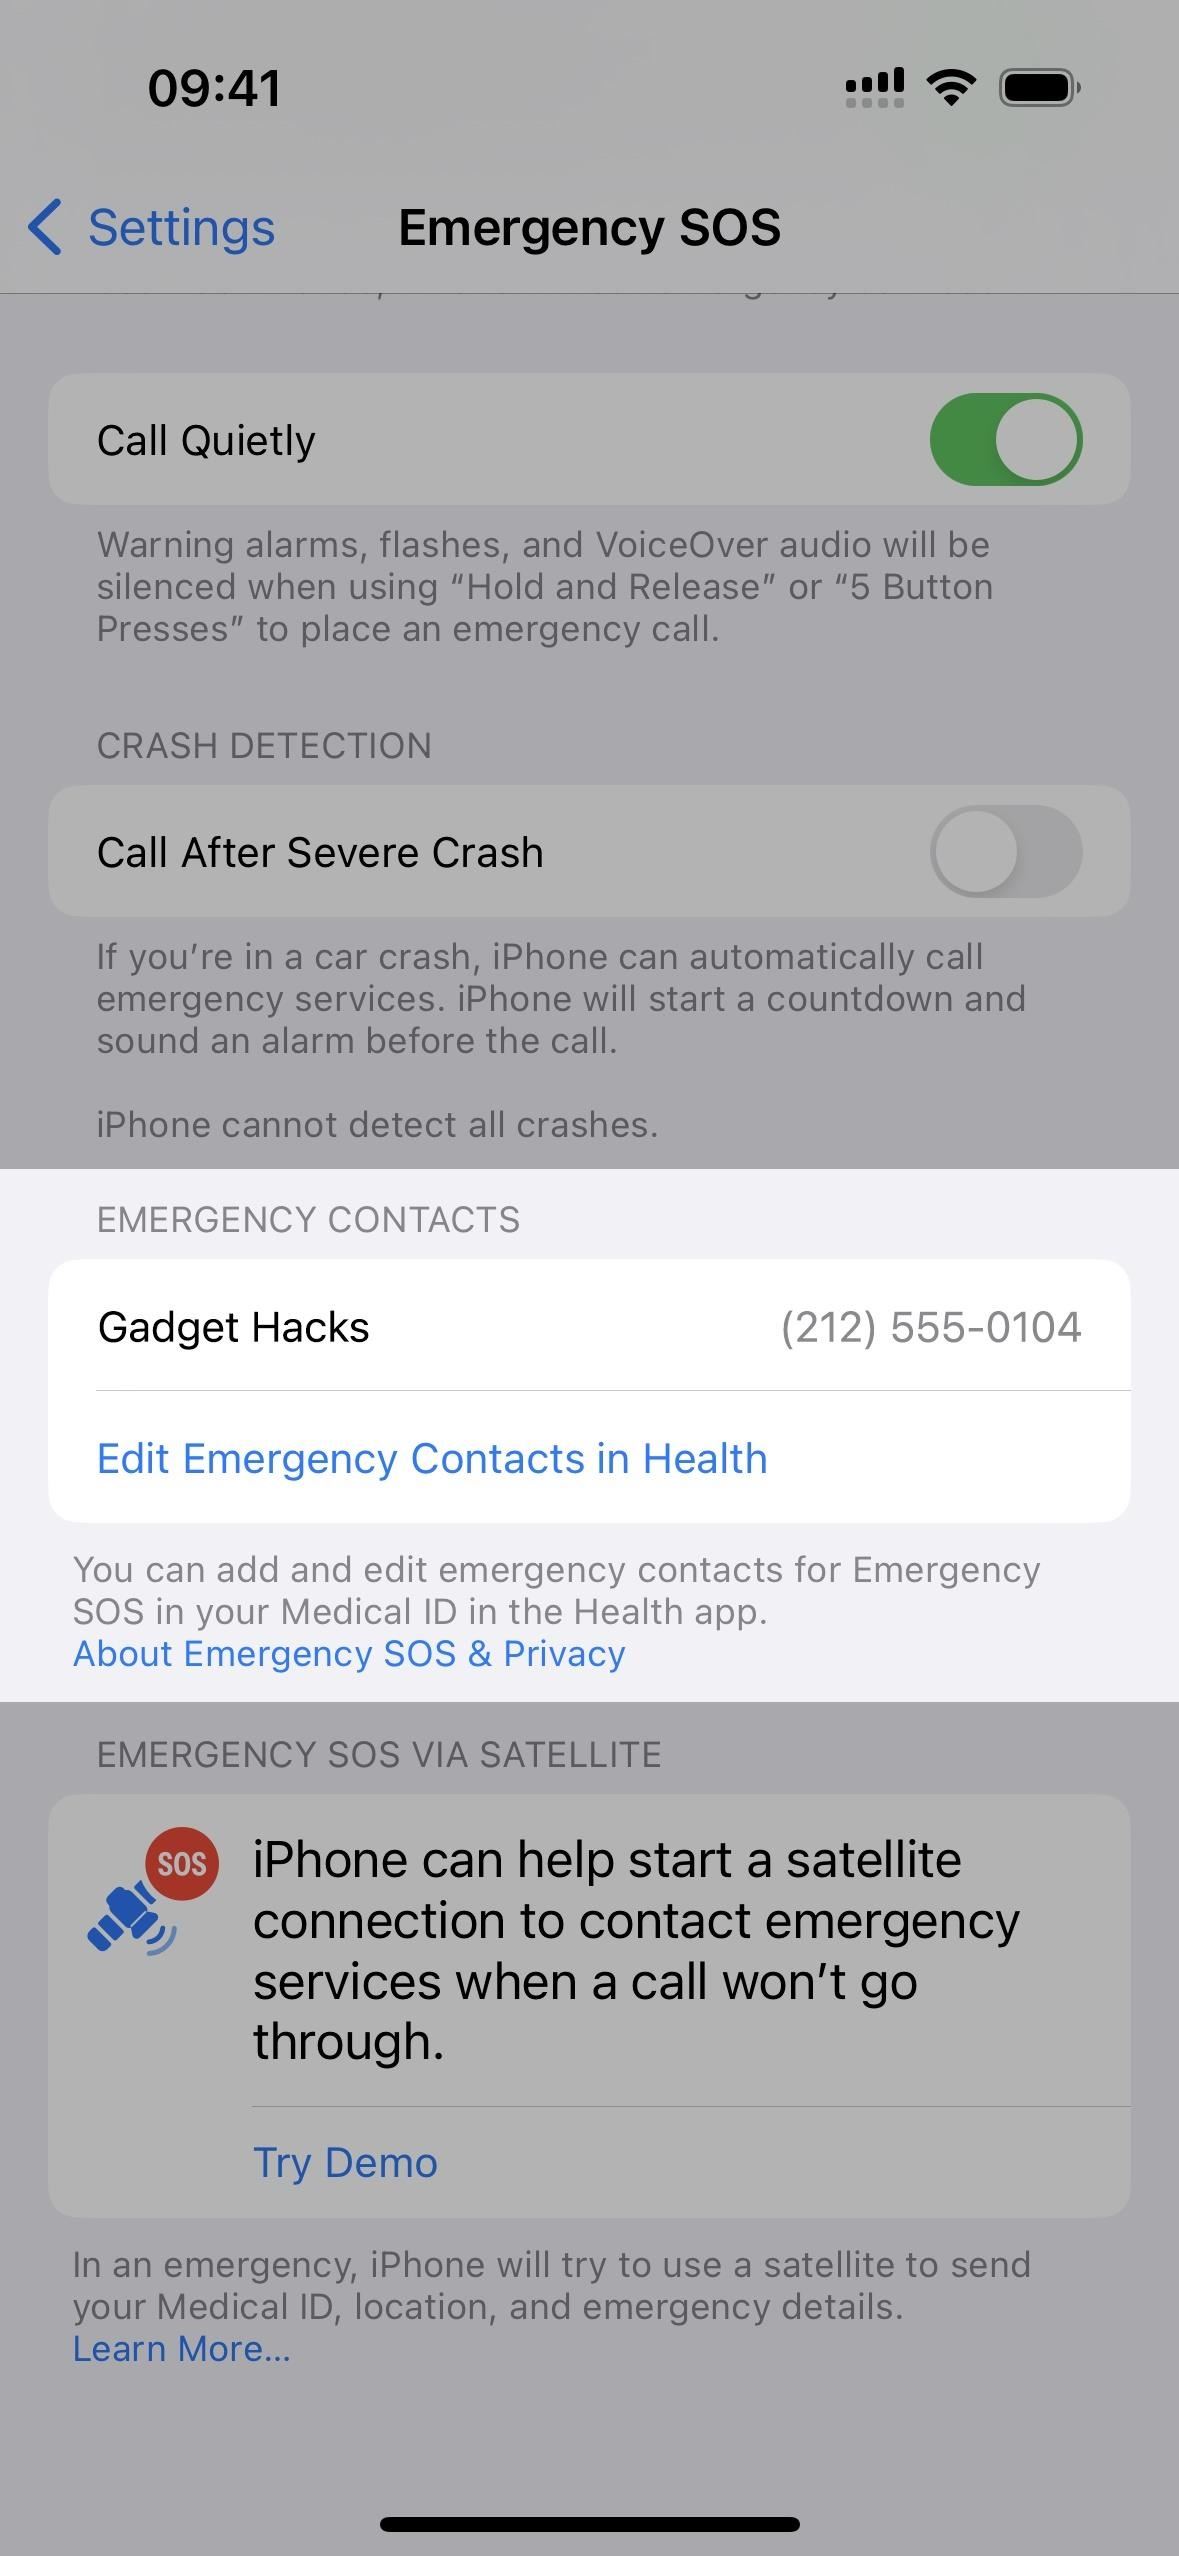 8 Ways to Call Emergency Services on Your iPhone When You Can't Dial 911 Manually